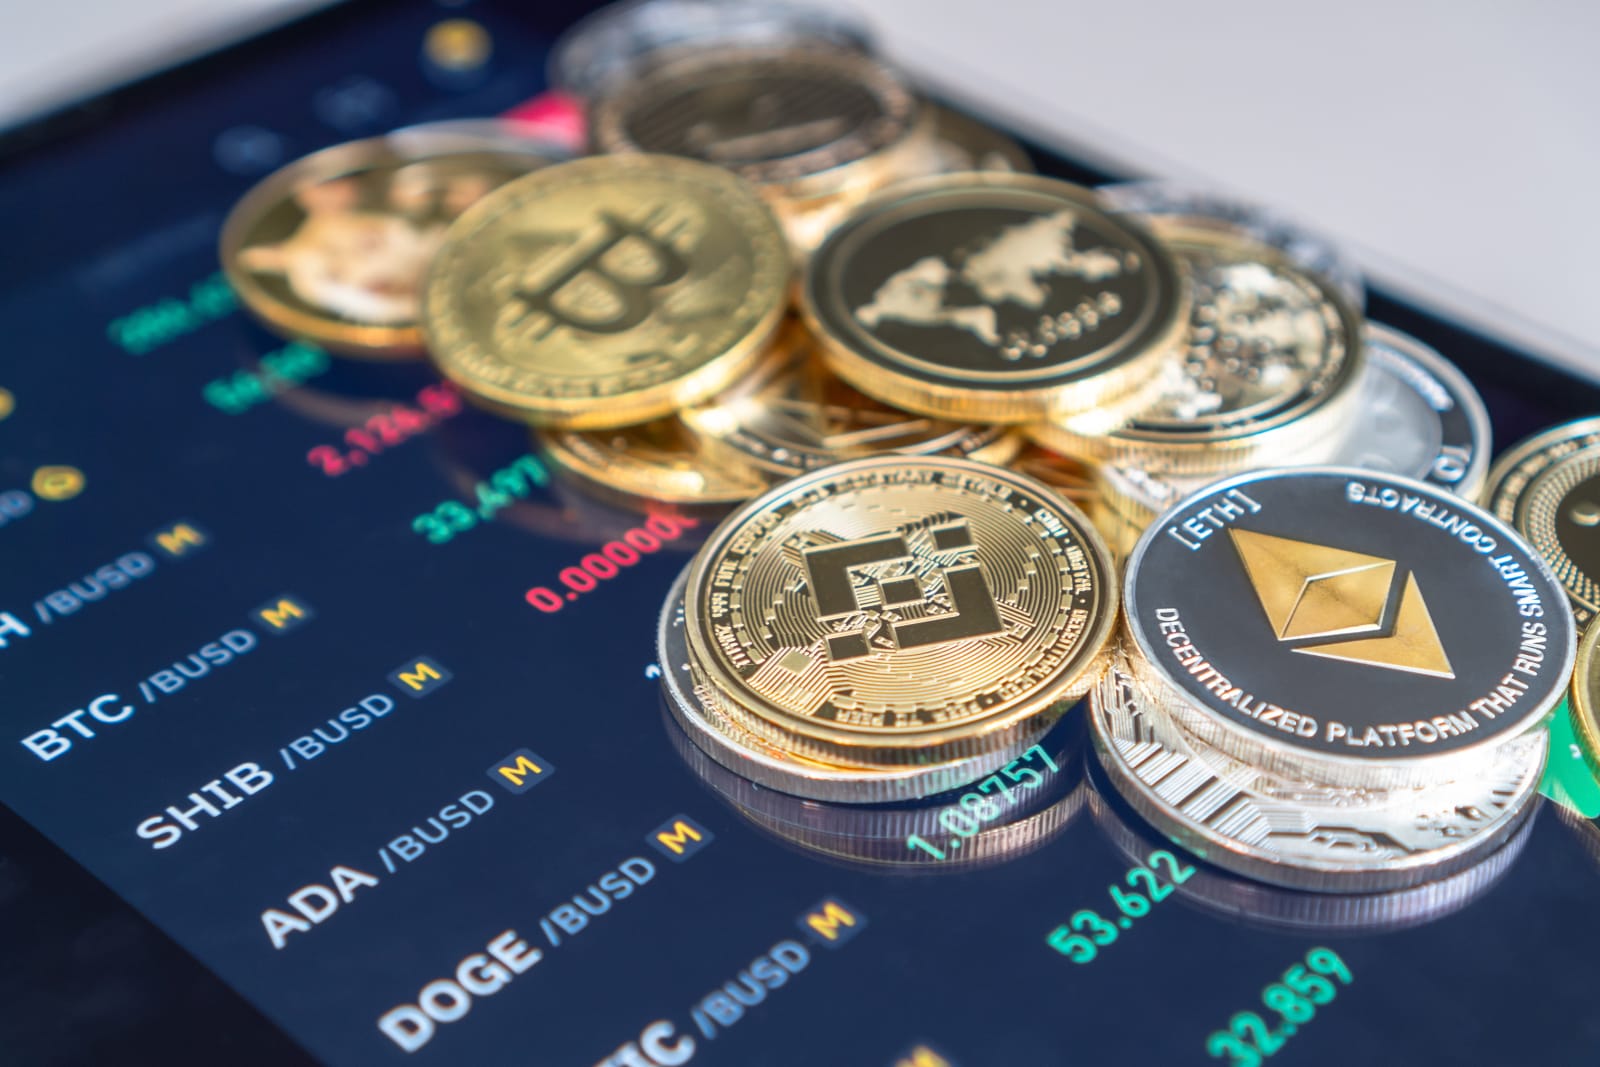 Crytocurrencies are seeing a surge. Photo by Chinnapong, via Shutterstock